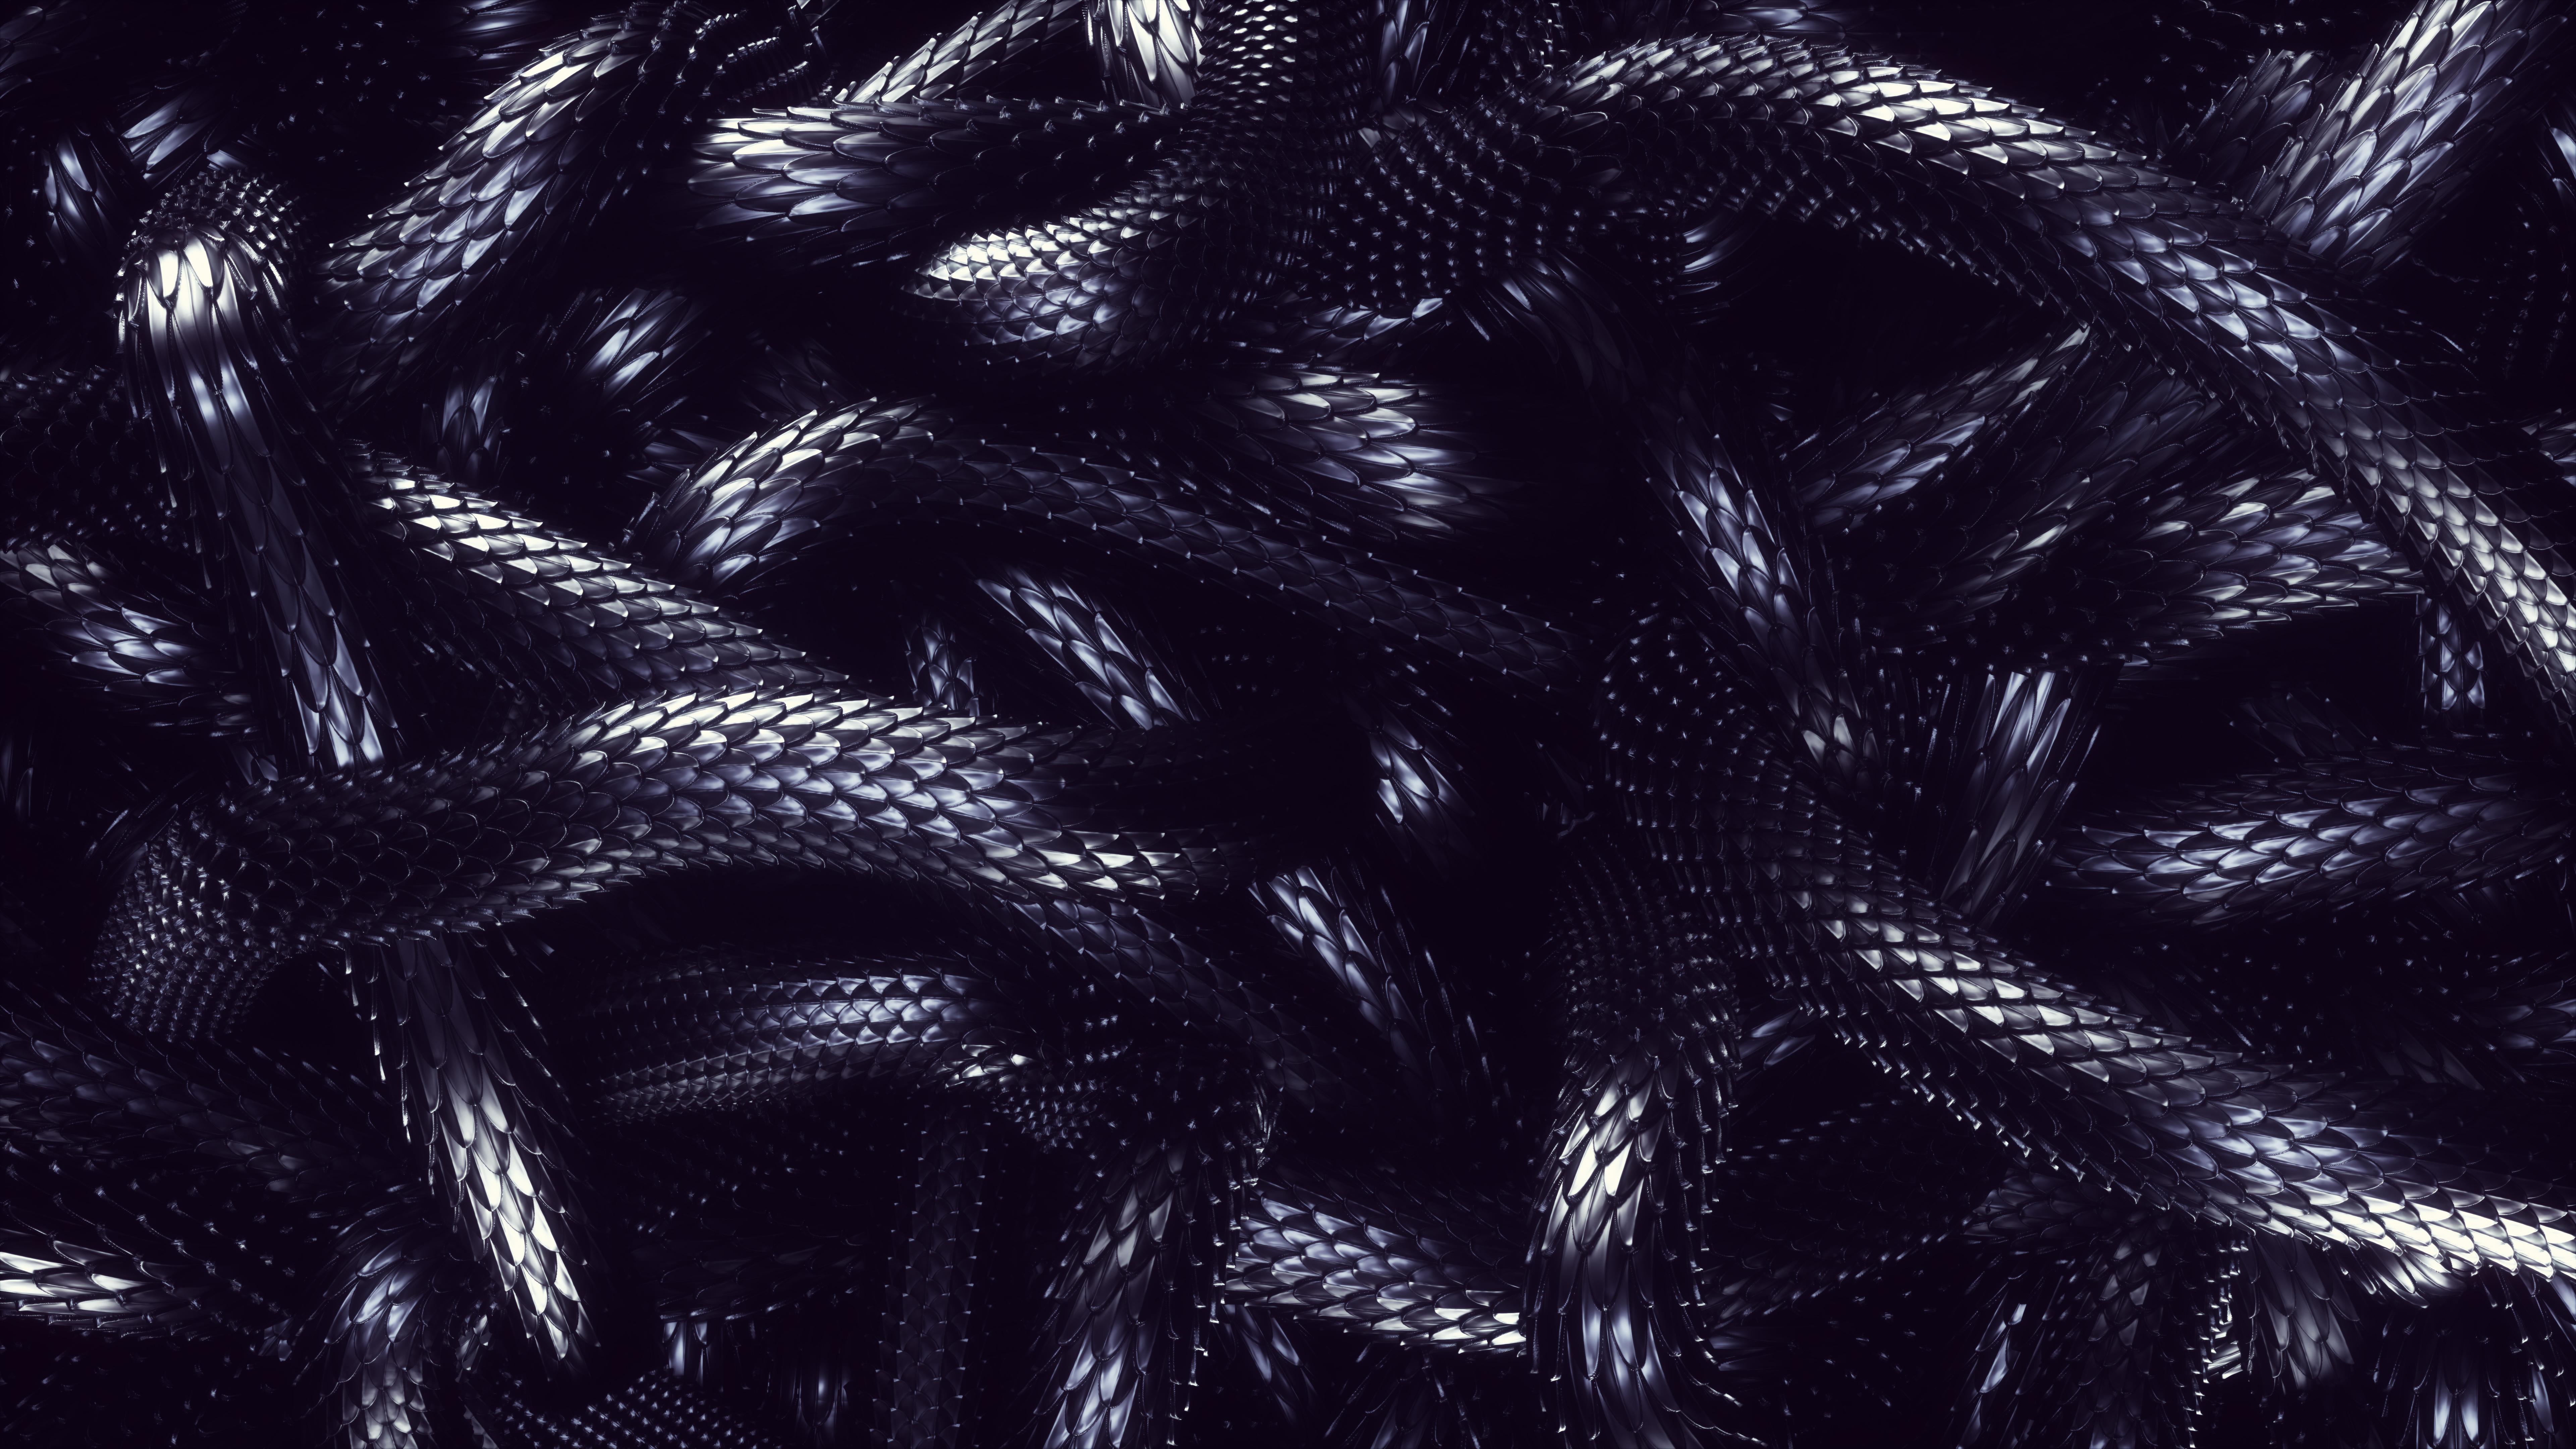 Snake Scale Animals Nature Metal Digital 3D 7680x4320